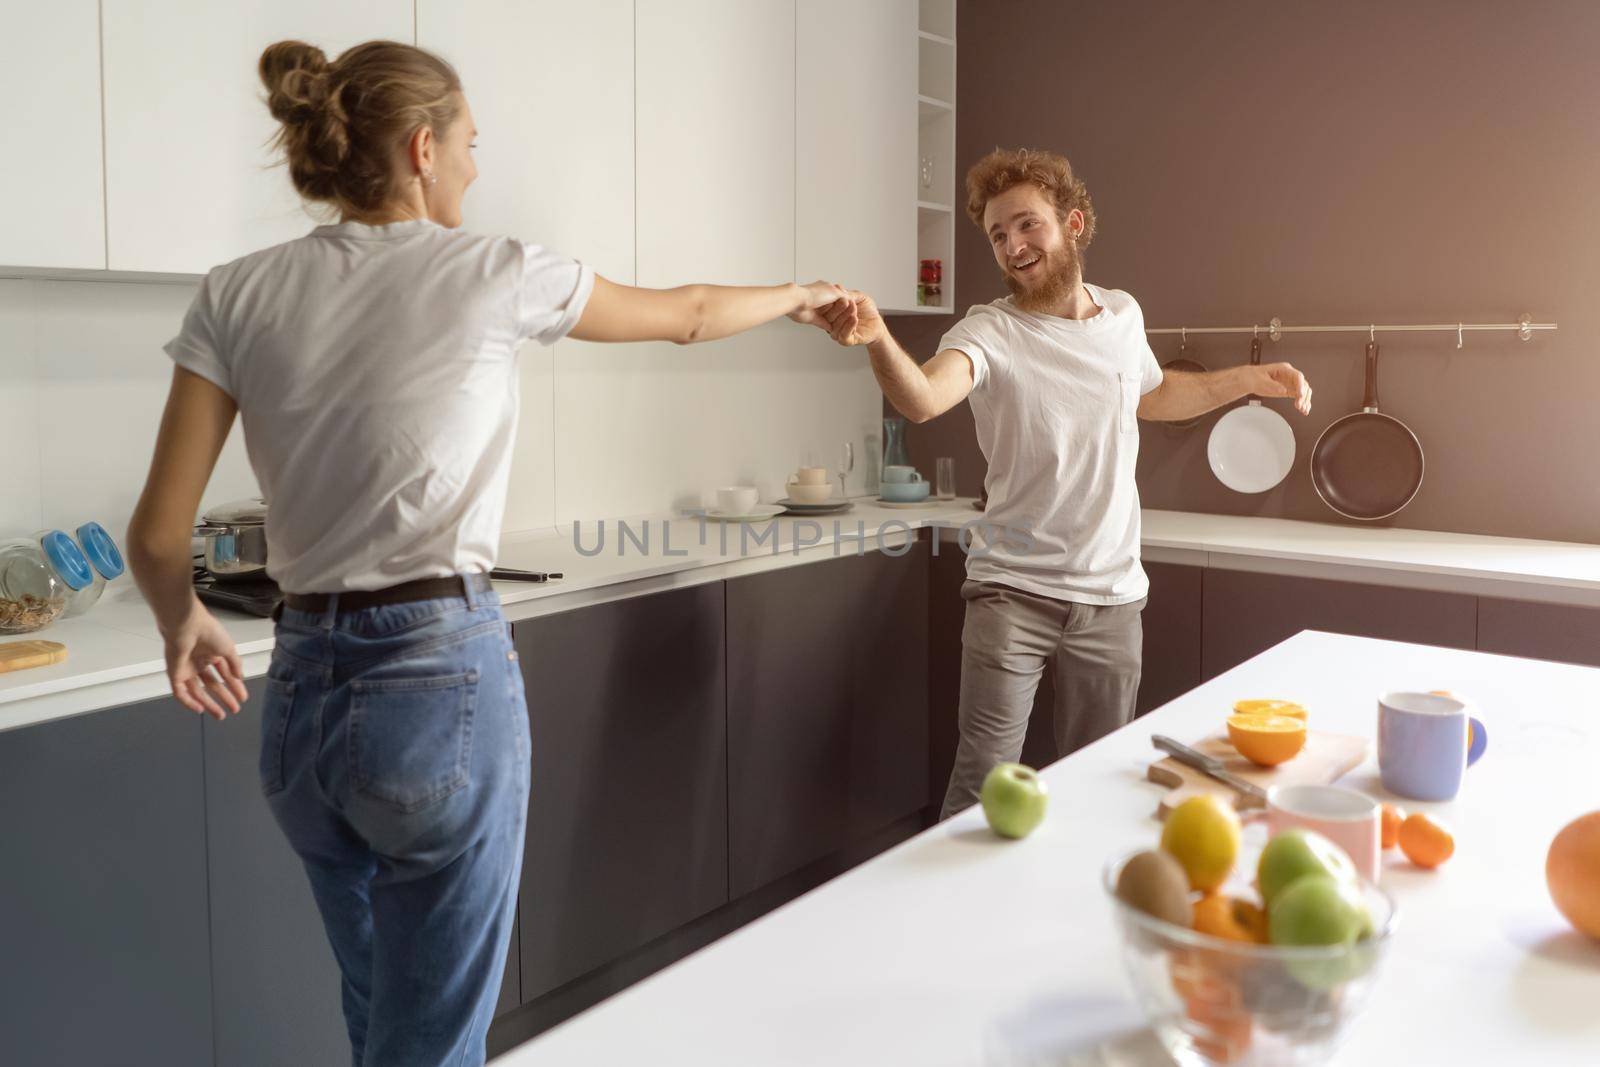 Waltzing in a new home young couple dancing celebrating their new purchase of buying their own house. Happy new family at kitchen wearing casual clothes. Love, family, happiness concept.